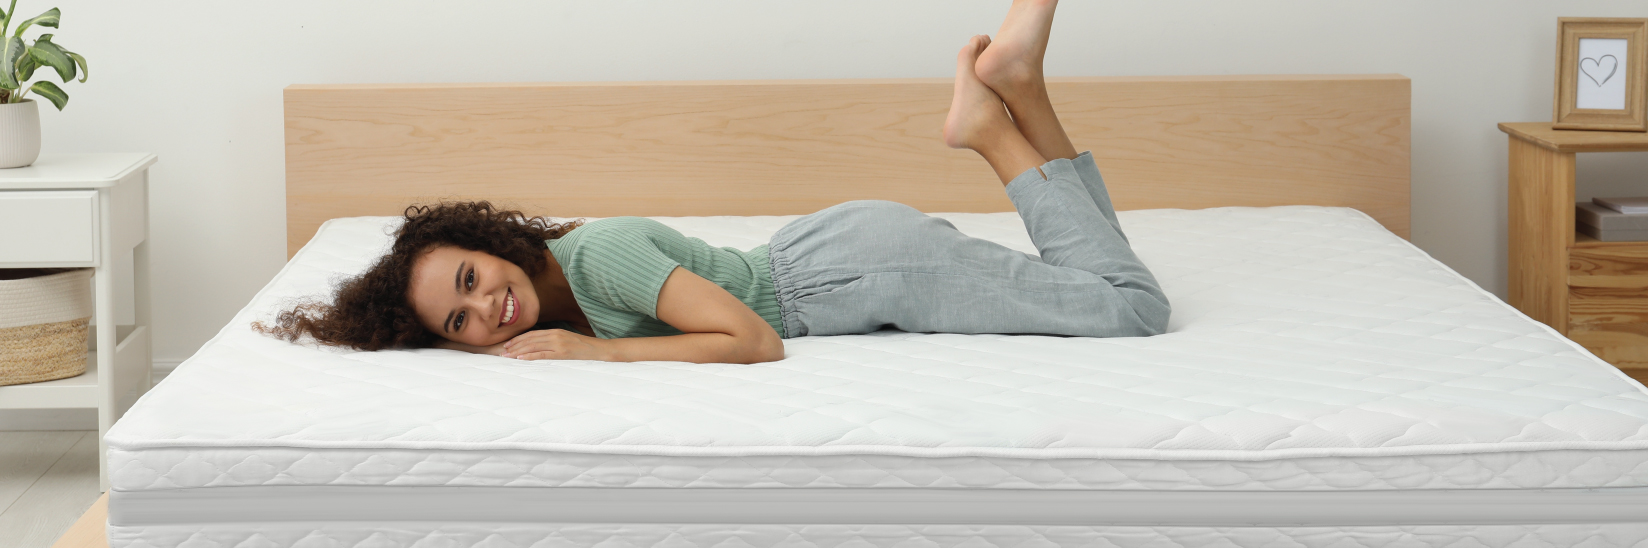 How to Shop For An Orthopaedic Mattress